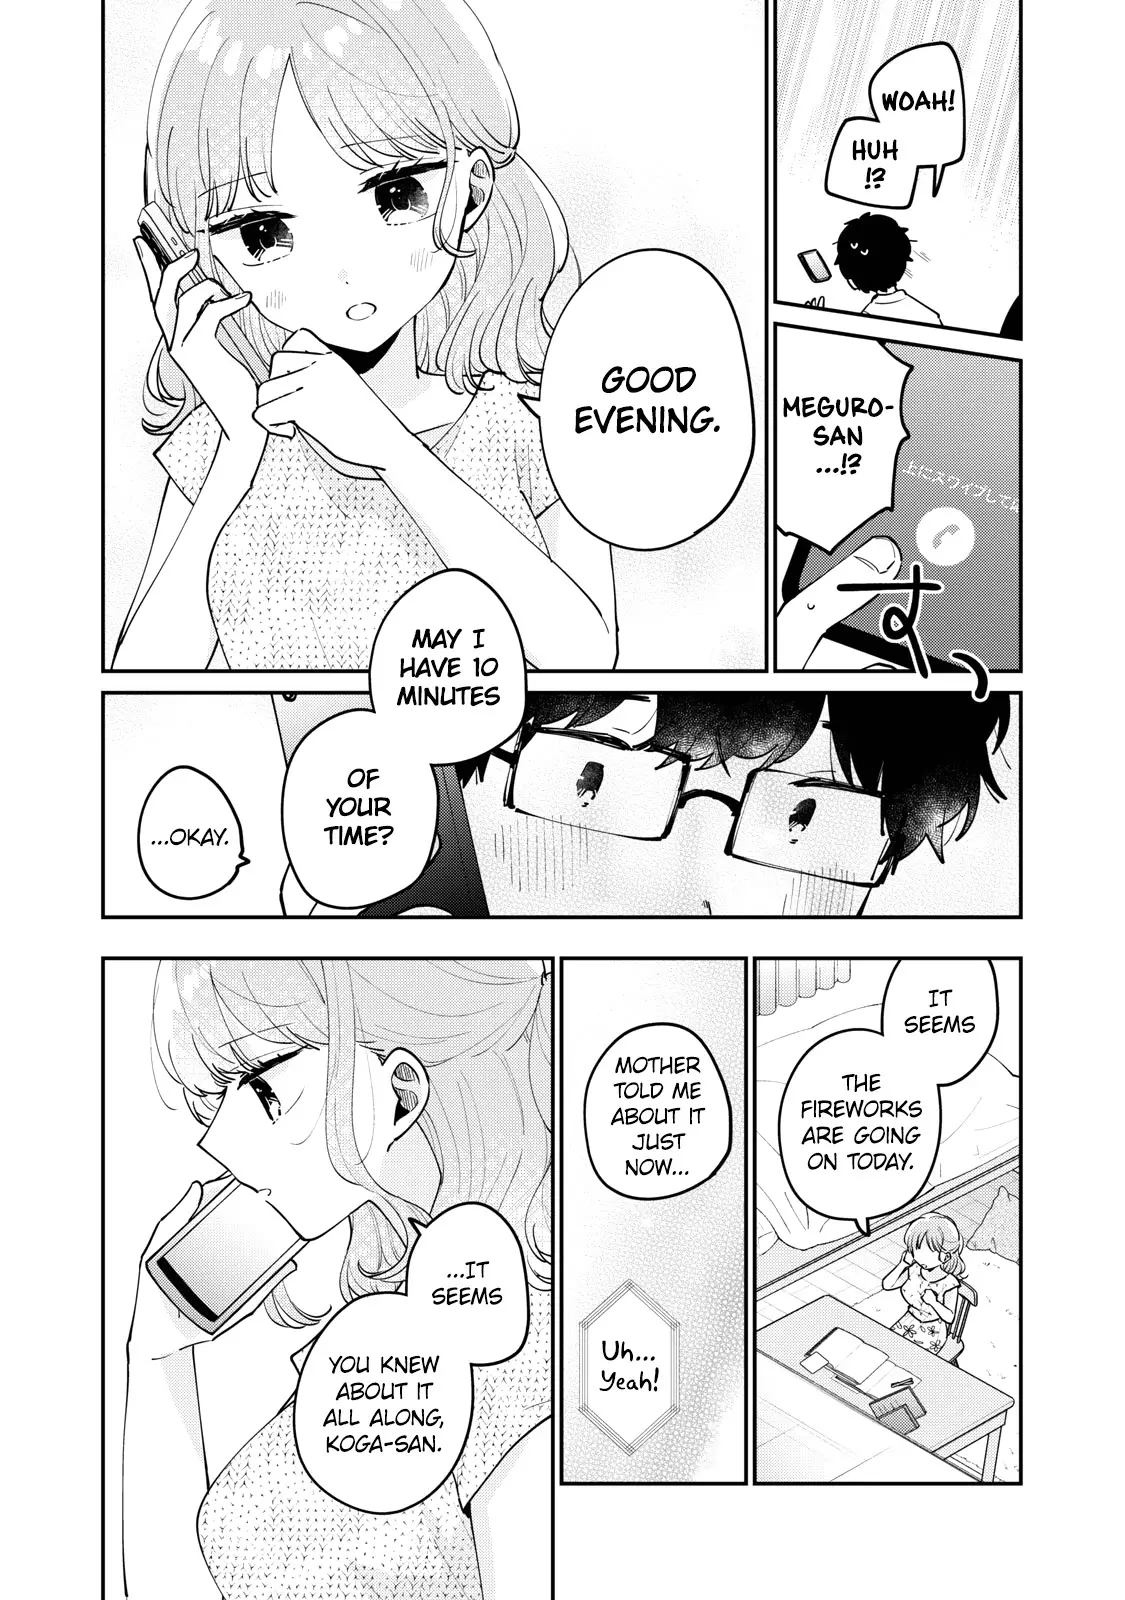 It's Not Meguro-San's First Time - 72 page 11-16899d38